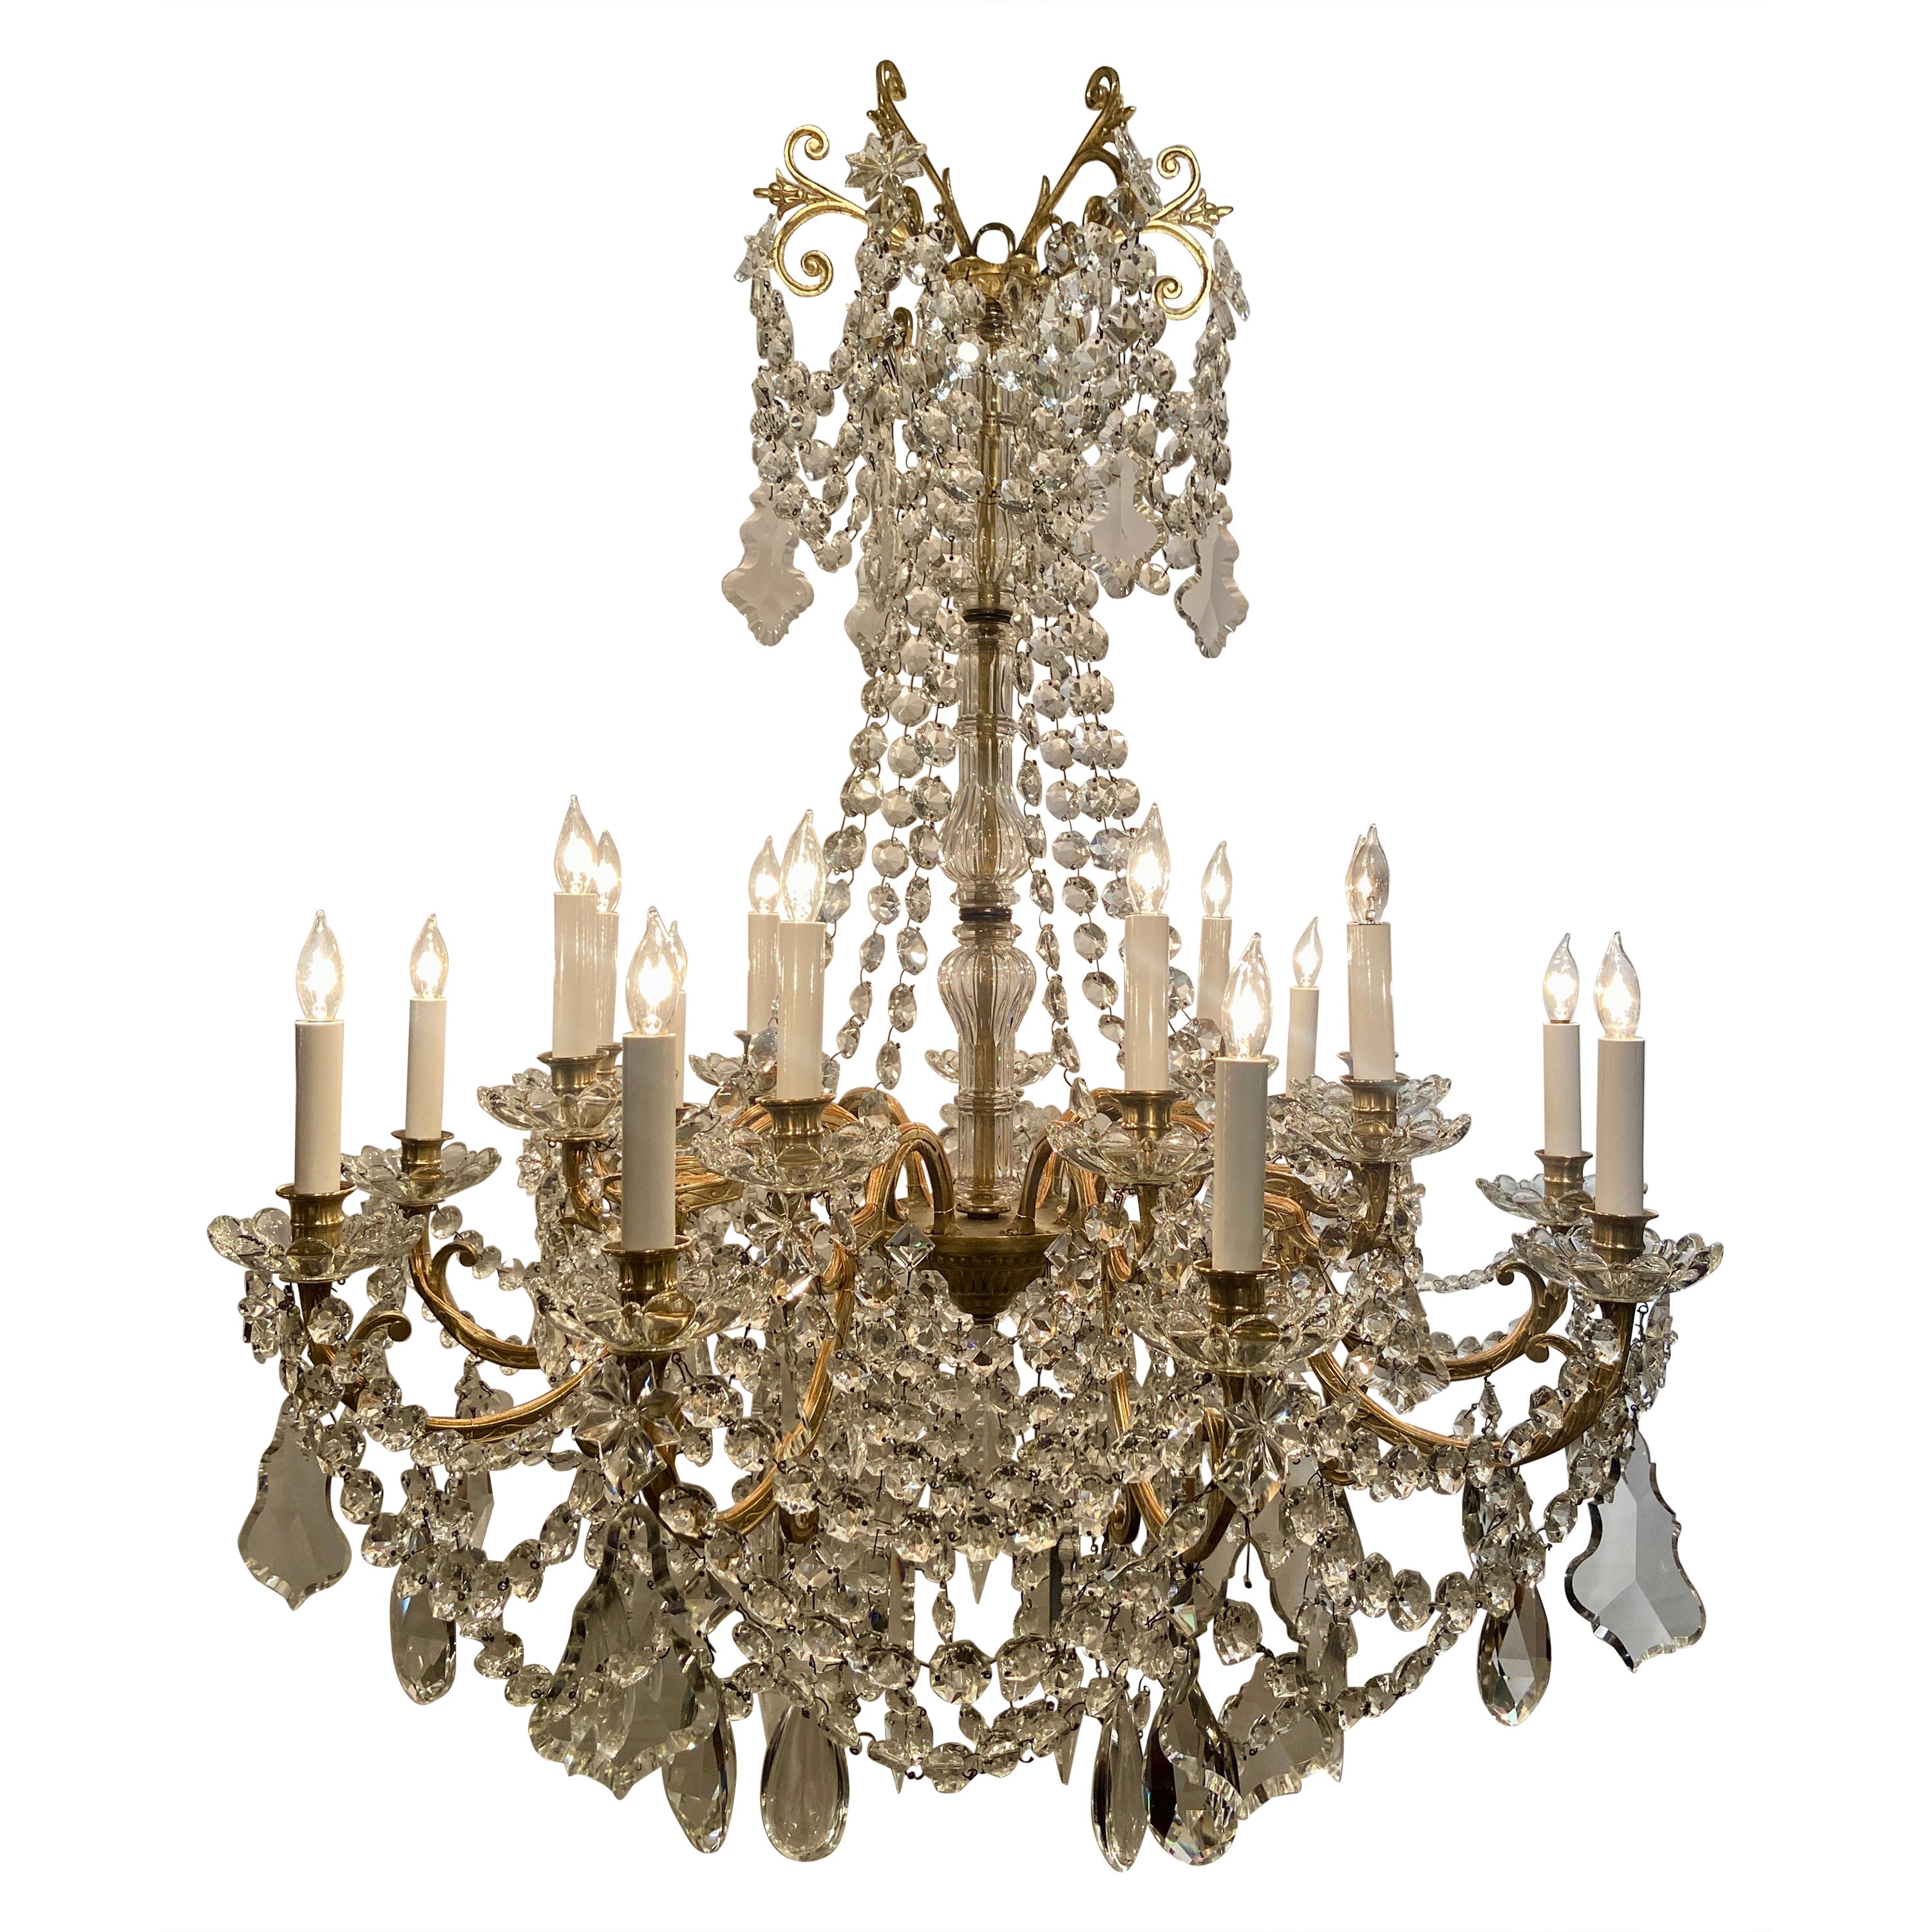 Antique French Gold Bronze and Crystal 18-Light Chandelier, Circa 1920-1930